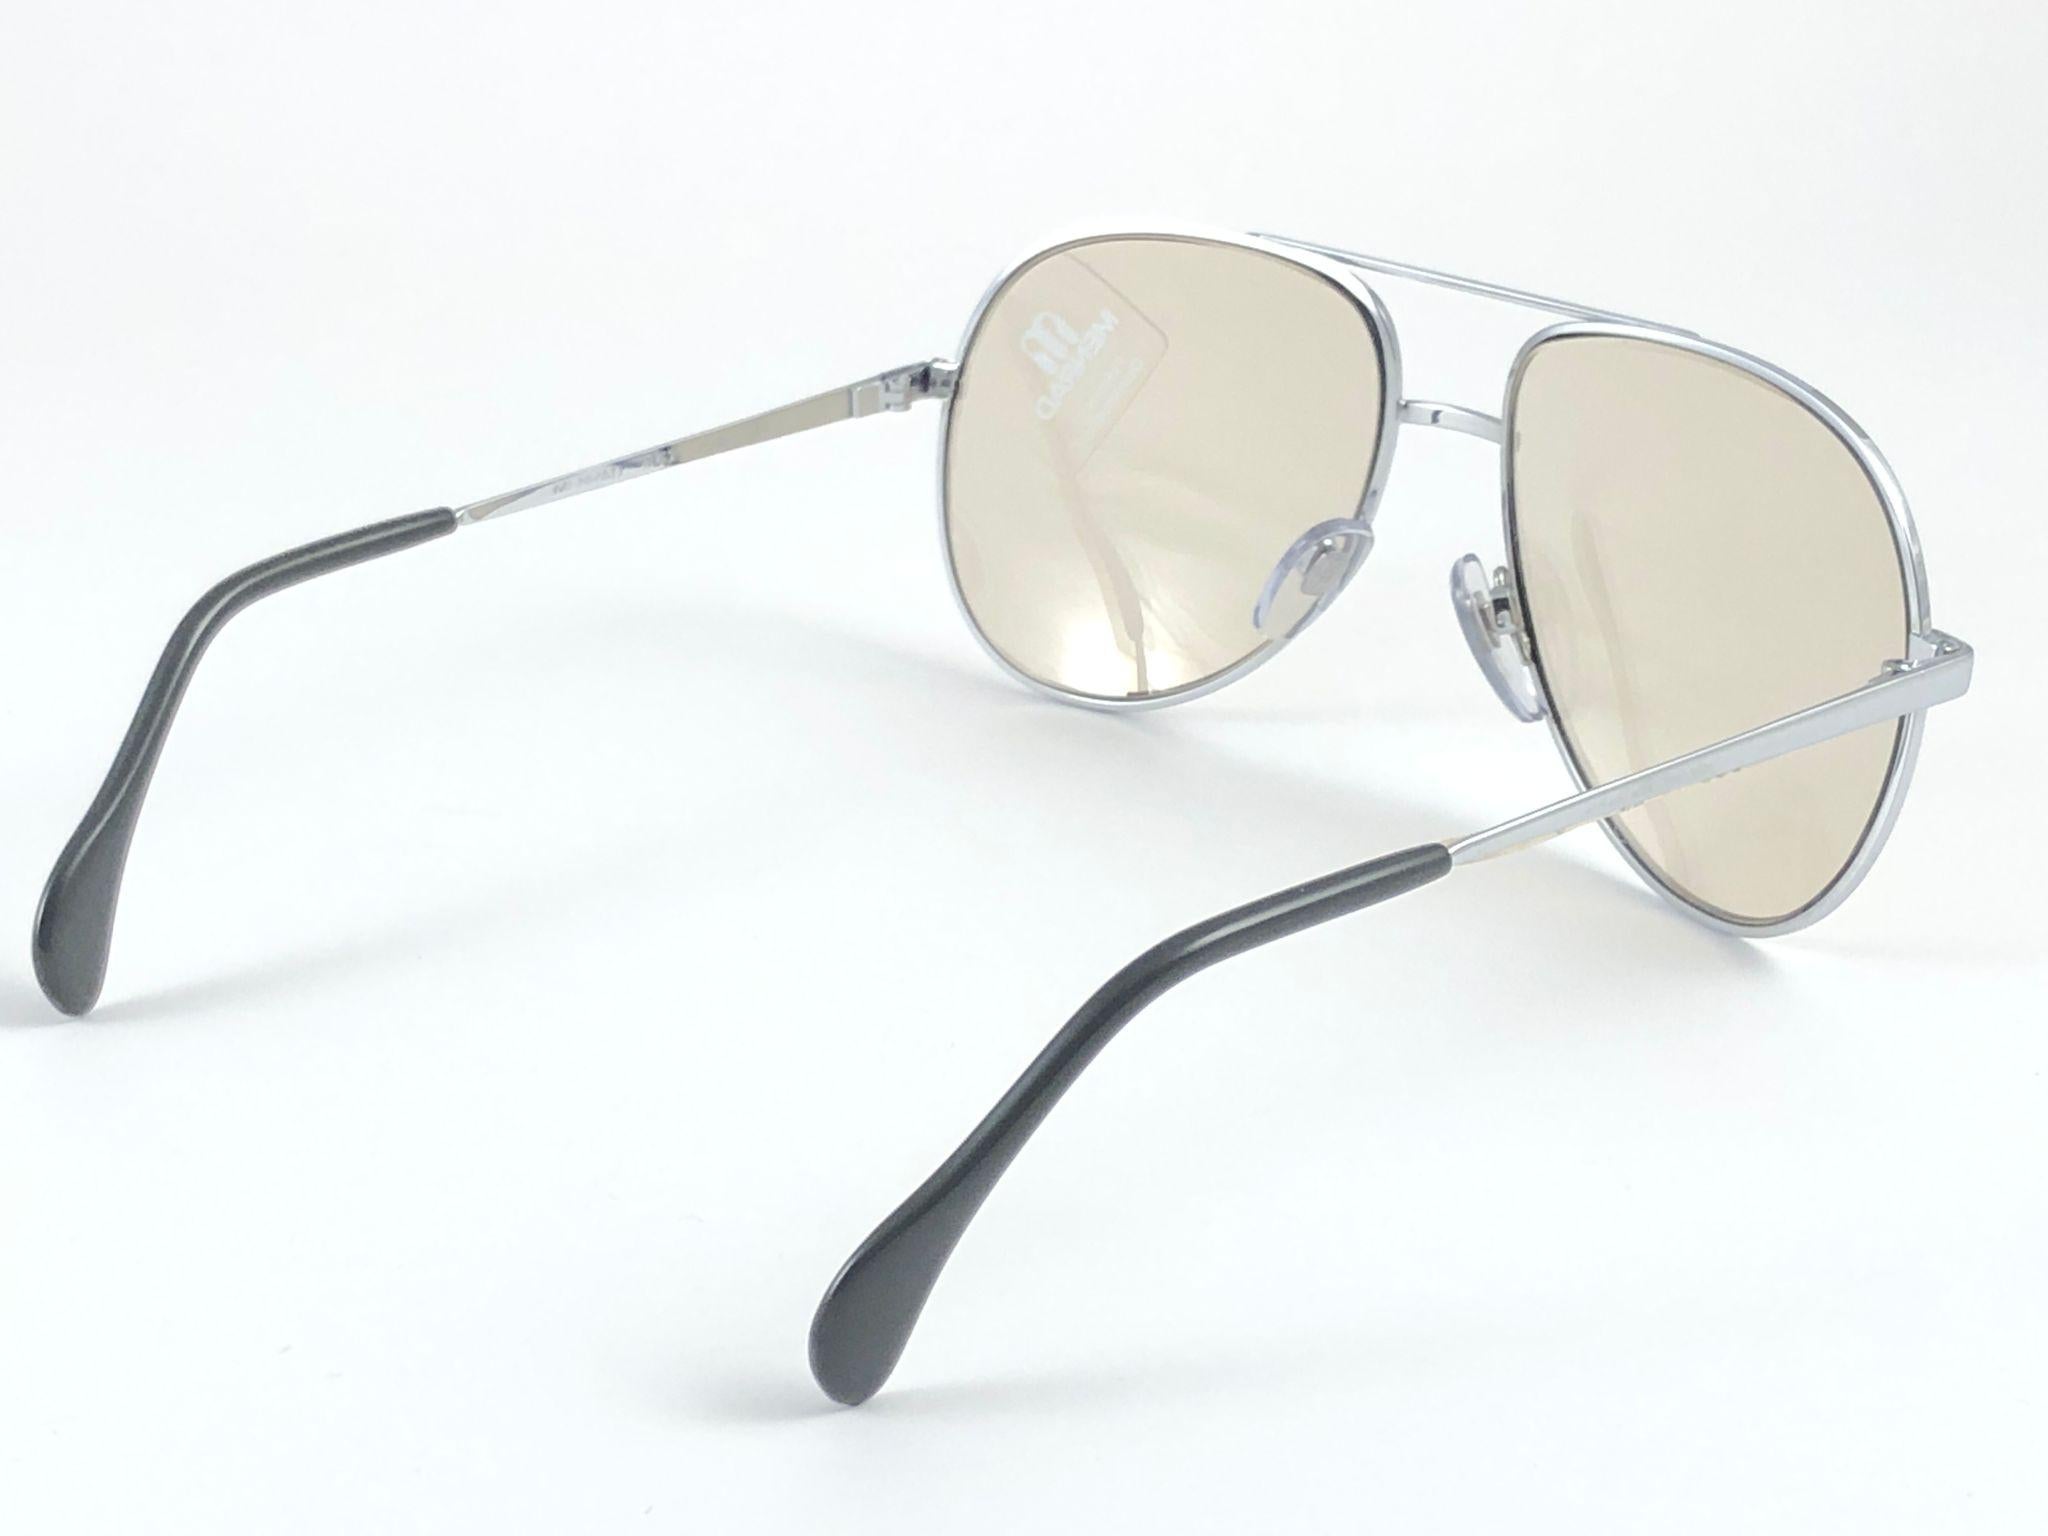 New Vintage Menrad M635 Silver Oversized Made in Germany 1970 Sunglasses  For Sale 1